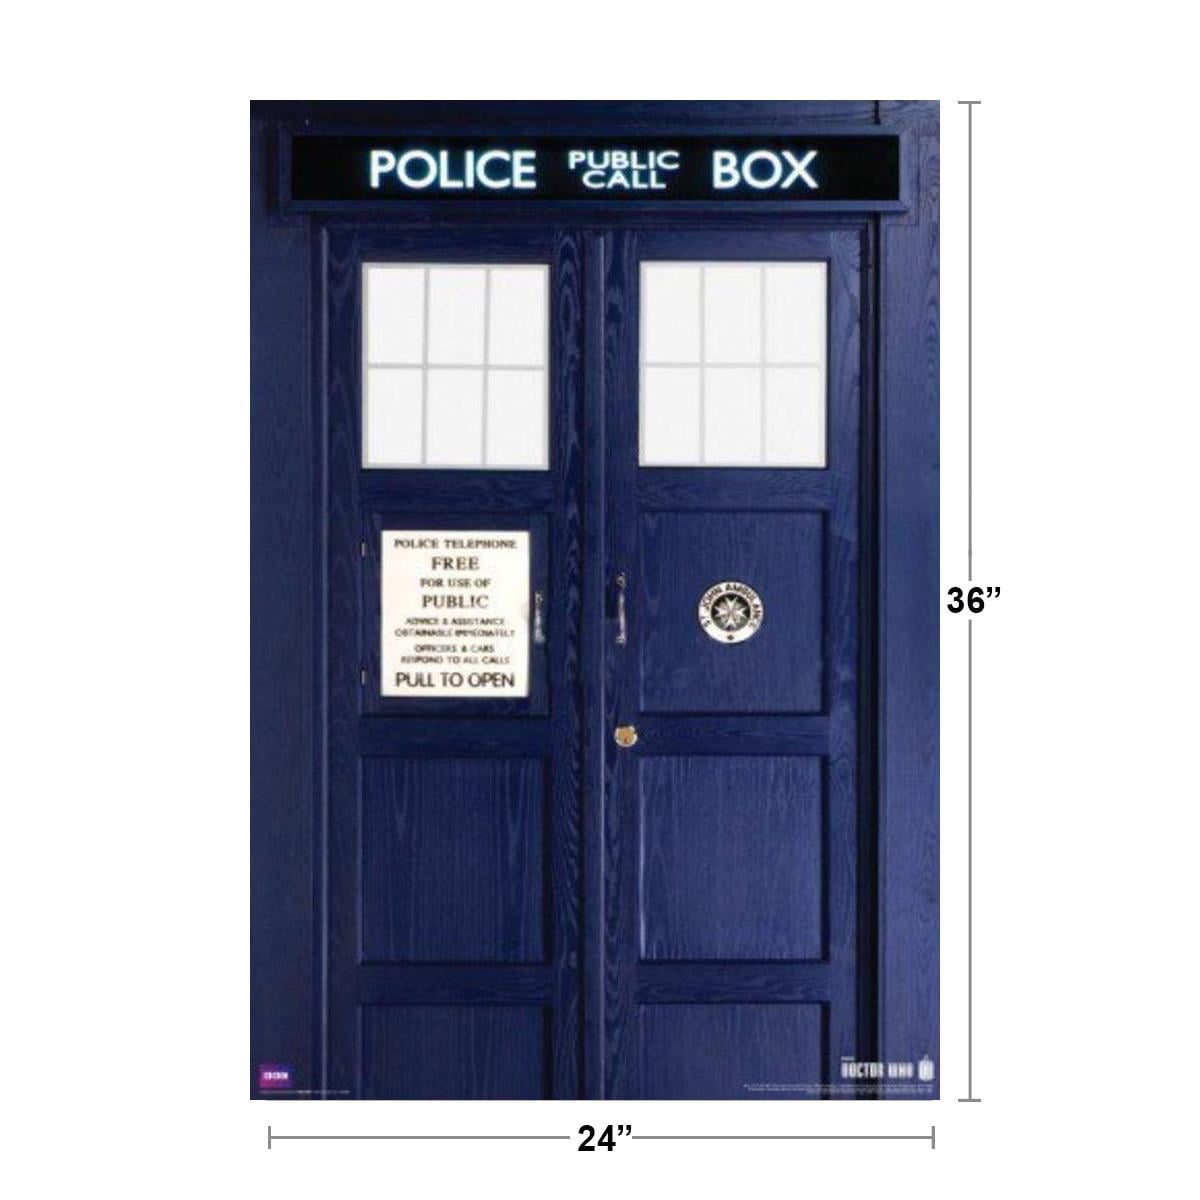 NEW ROLLED Doctor Who Eleventh Doctor Tardis Police Call Box 24 x 36 Poster 